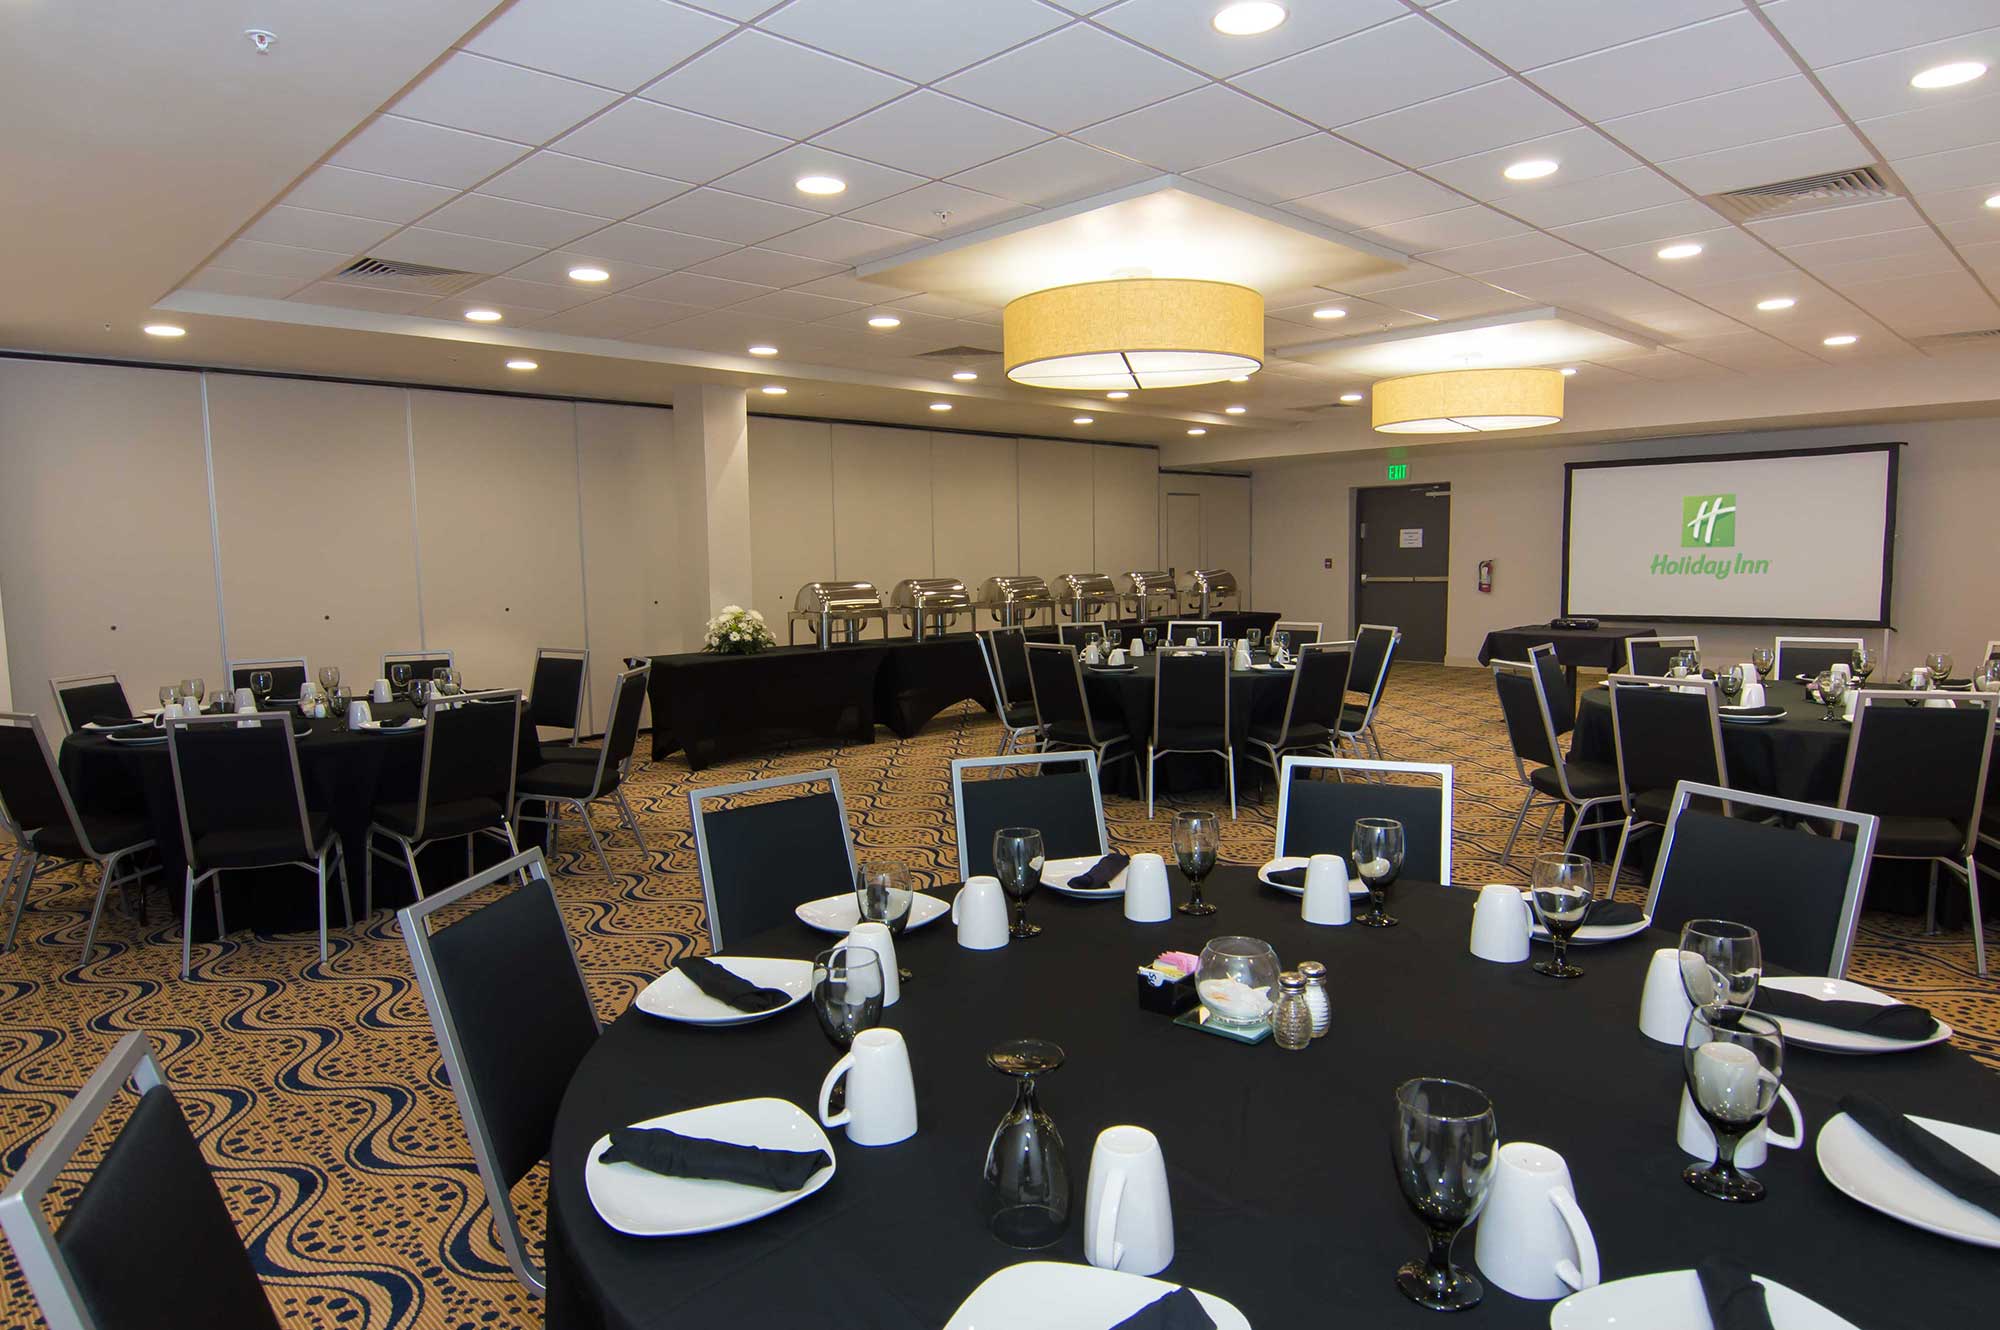 Flexible meeting space for receptions, banquets, parties